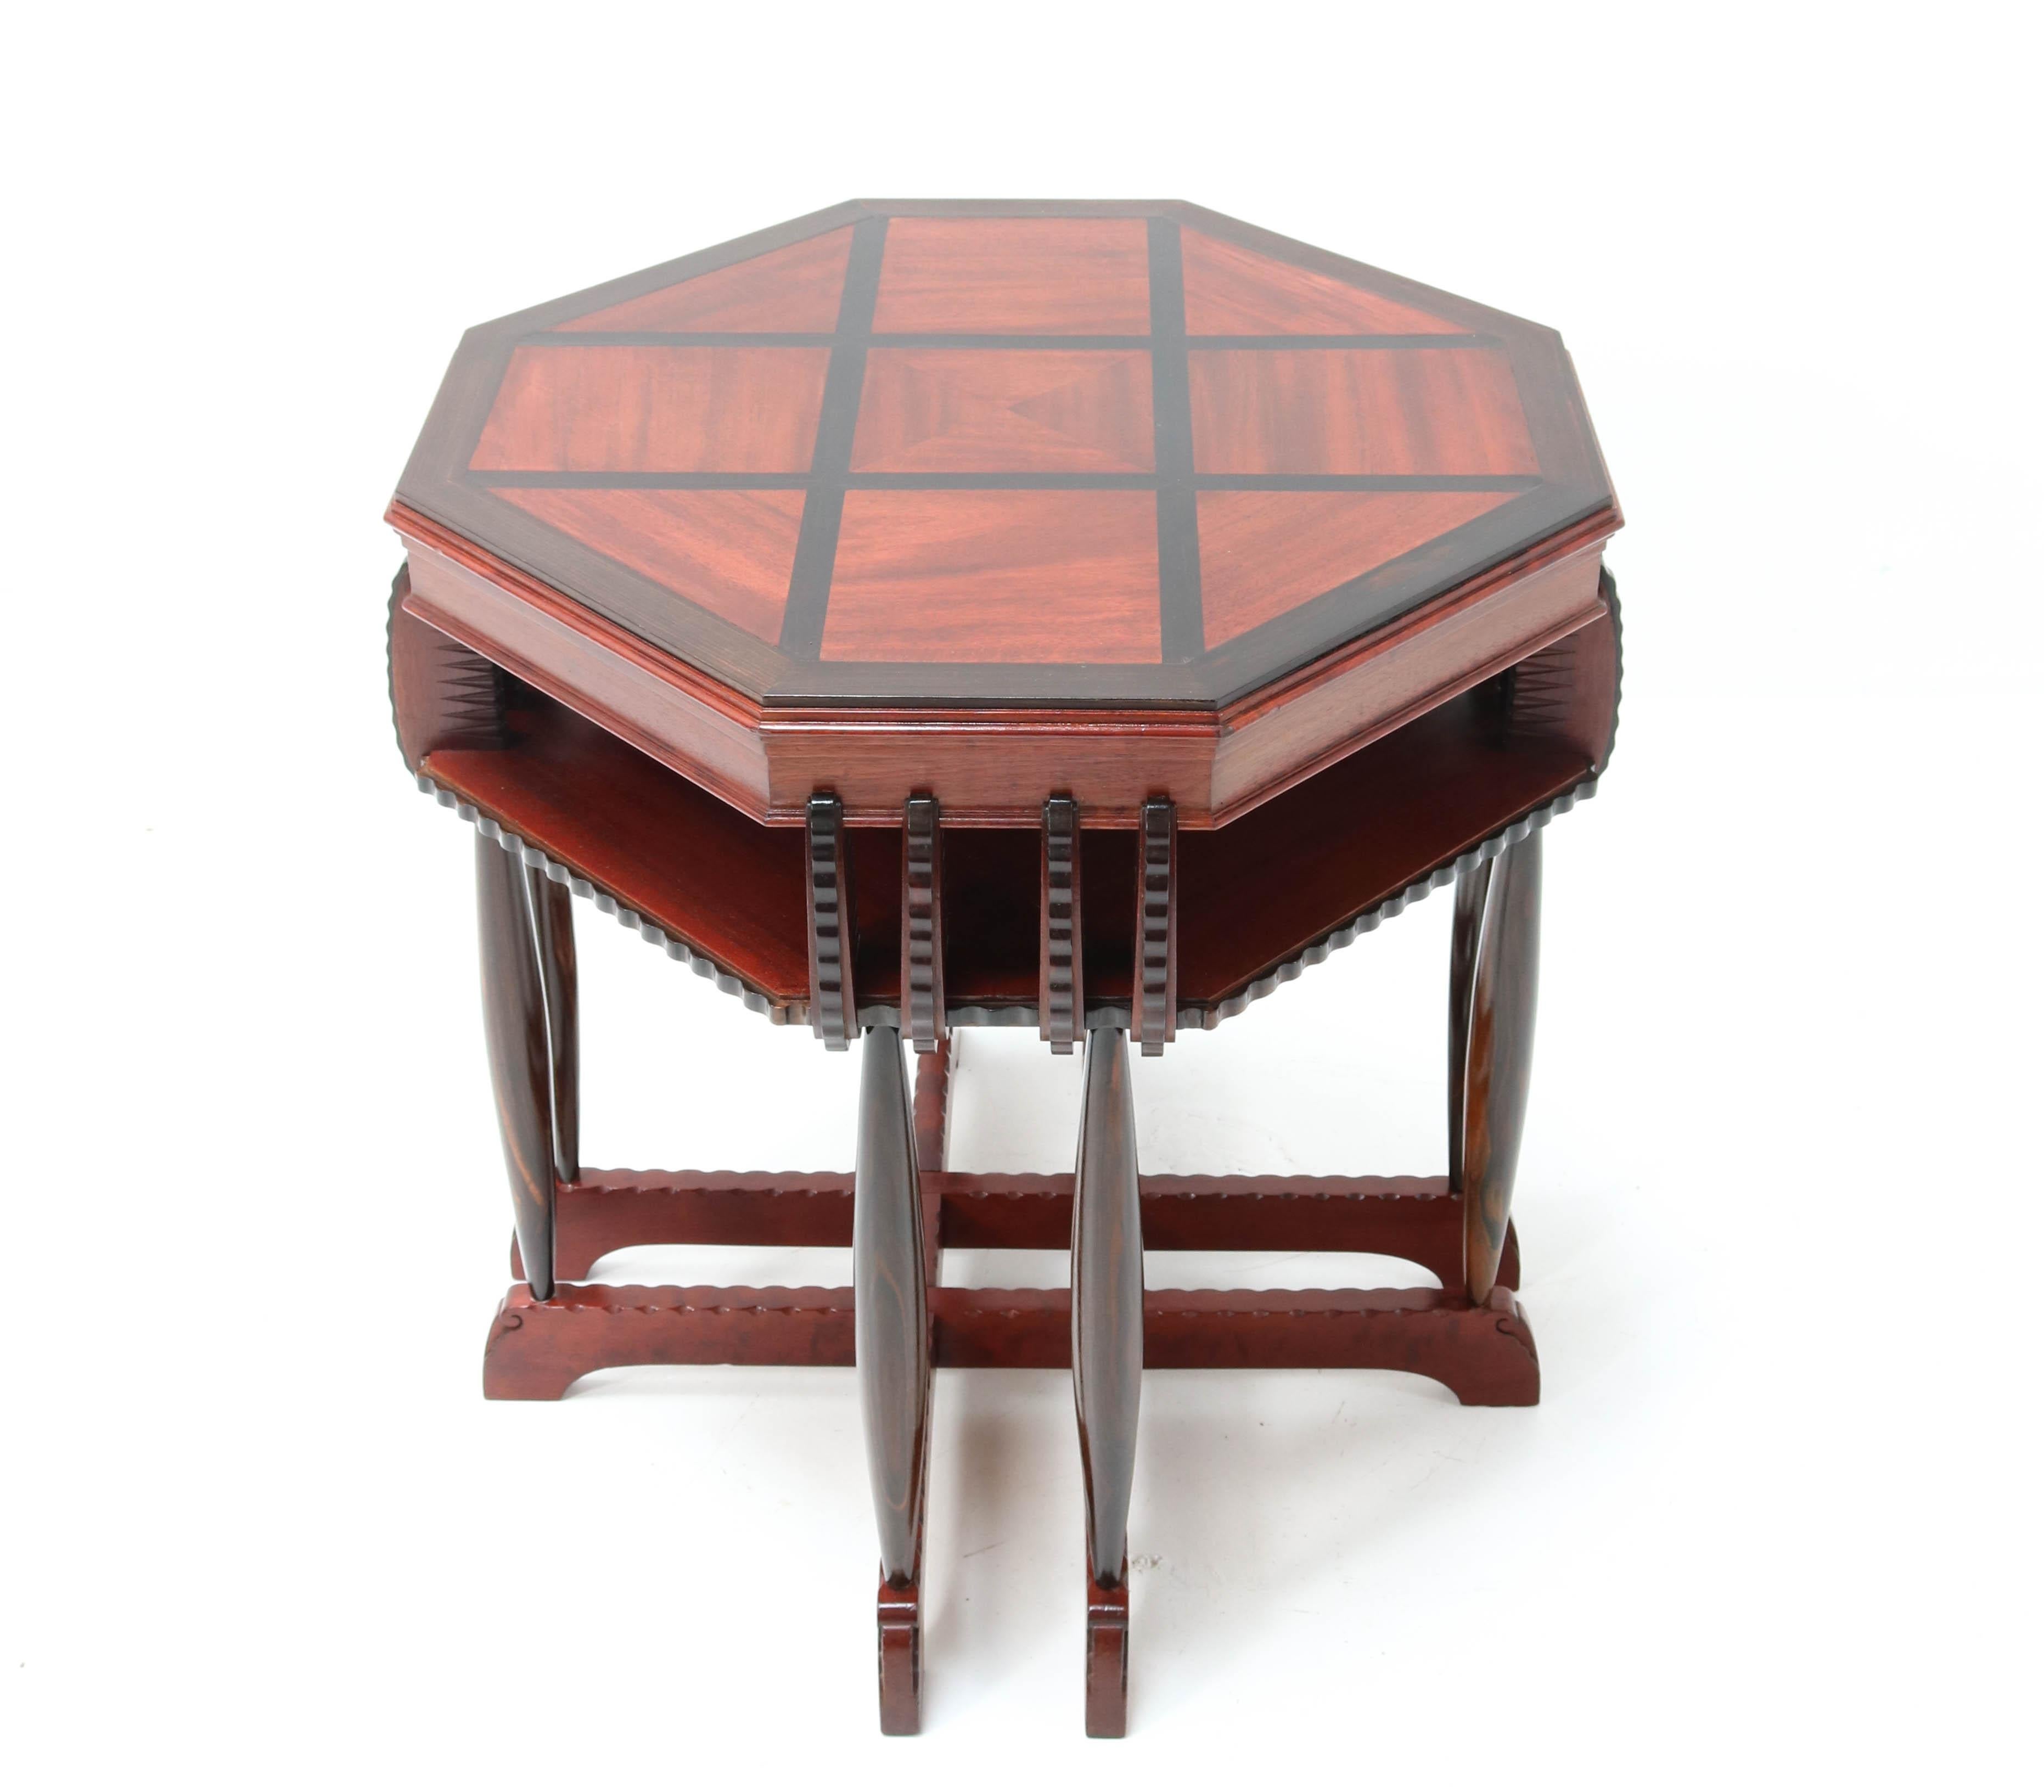 Early 20th Century Mahogany Art Deco Amsterdamse School Coffee Table by F.A. Warners, 1920s